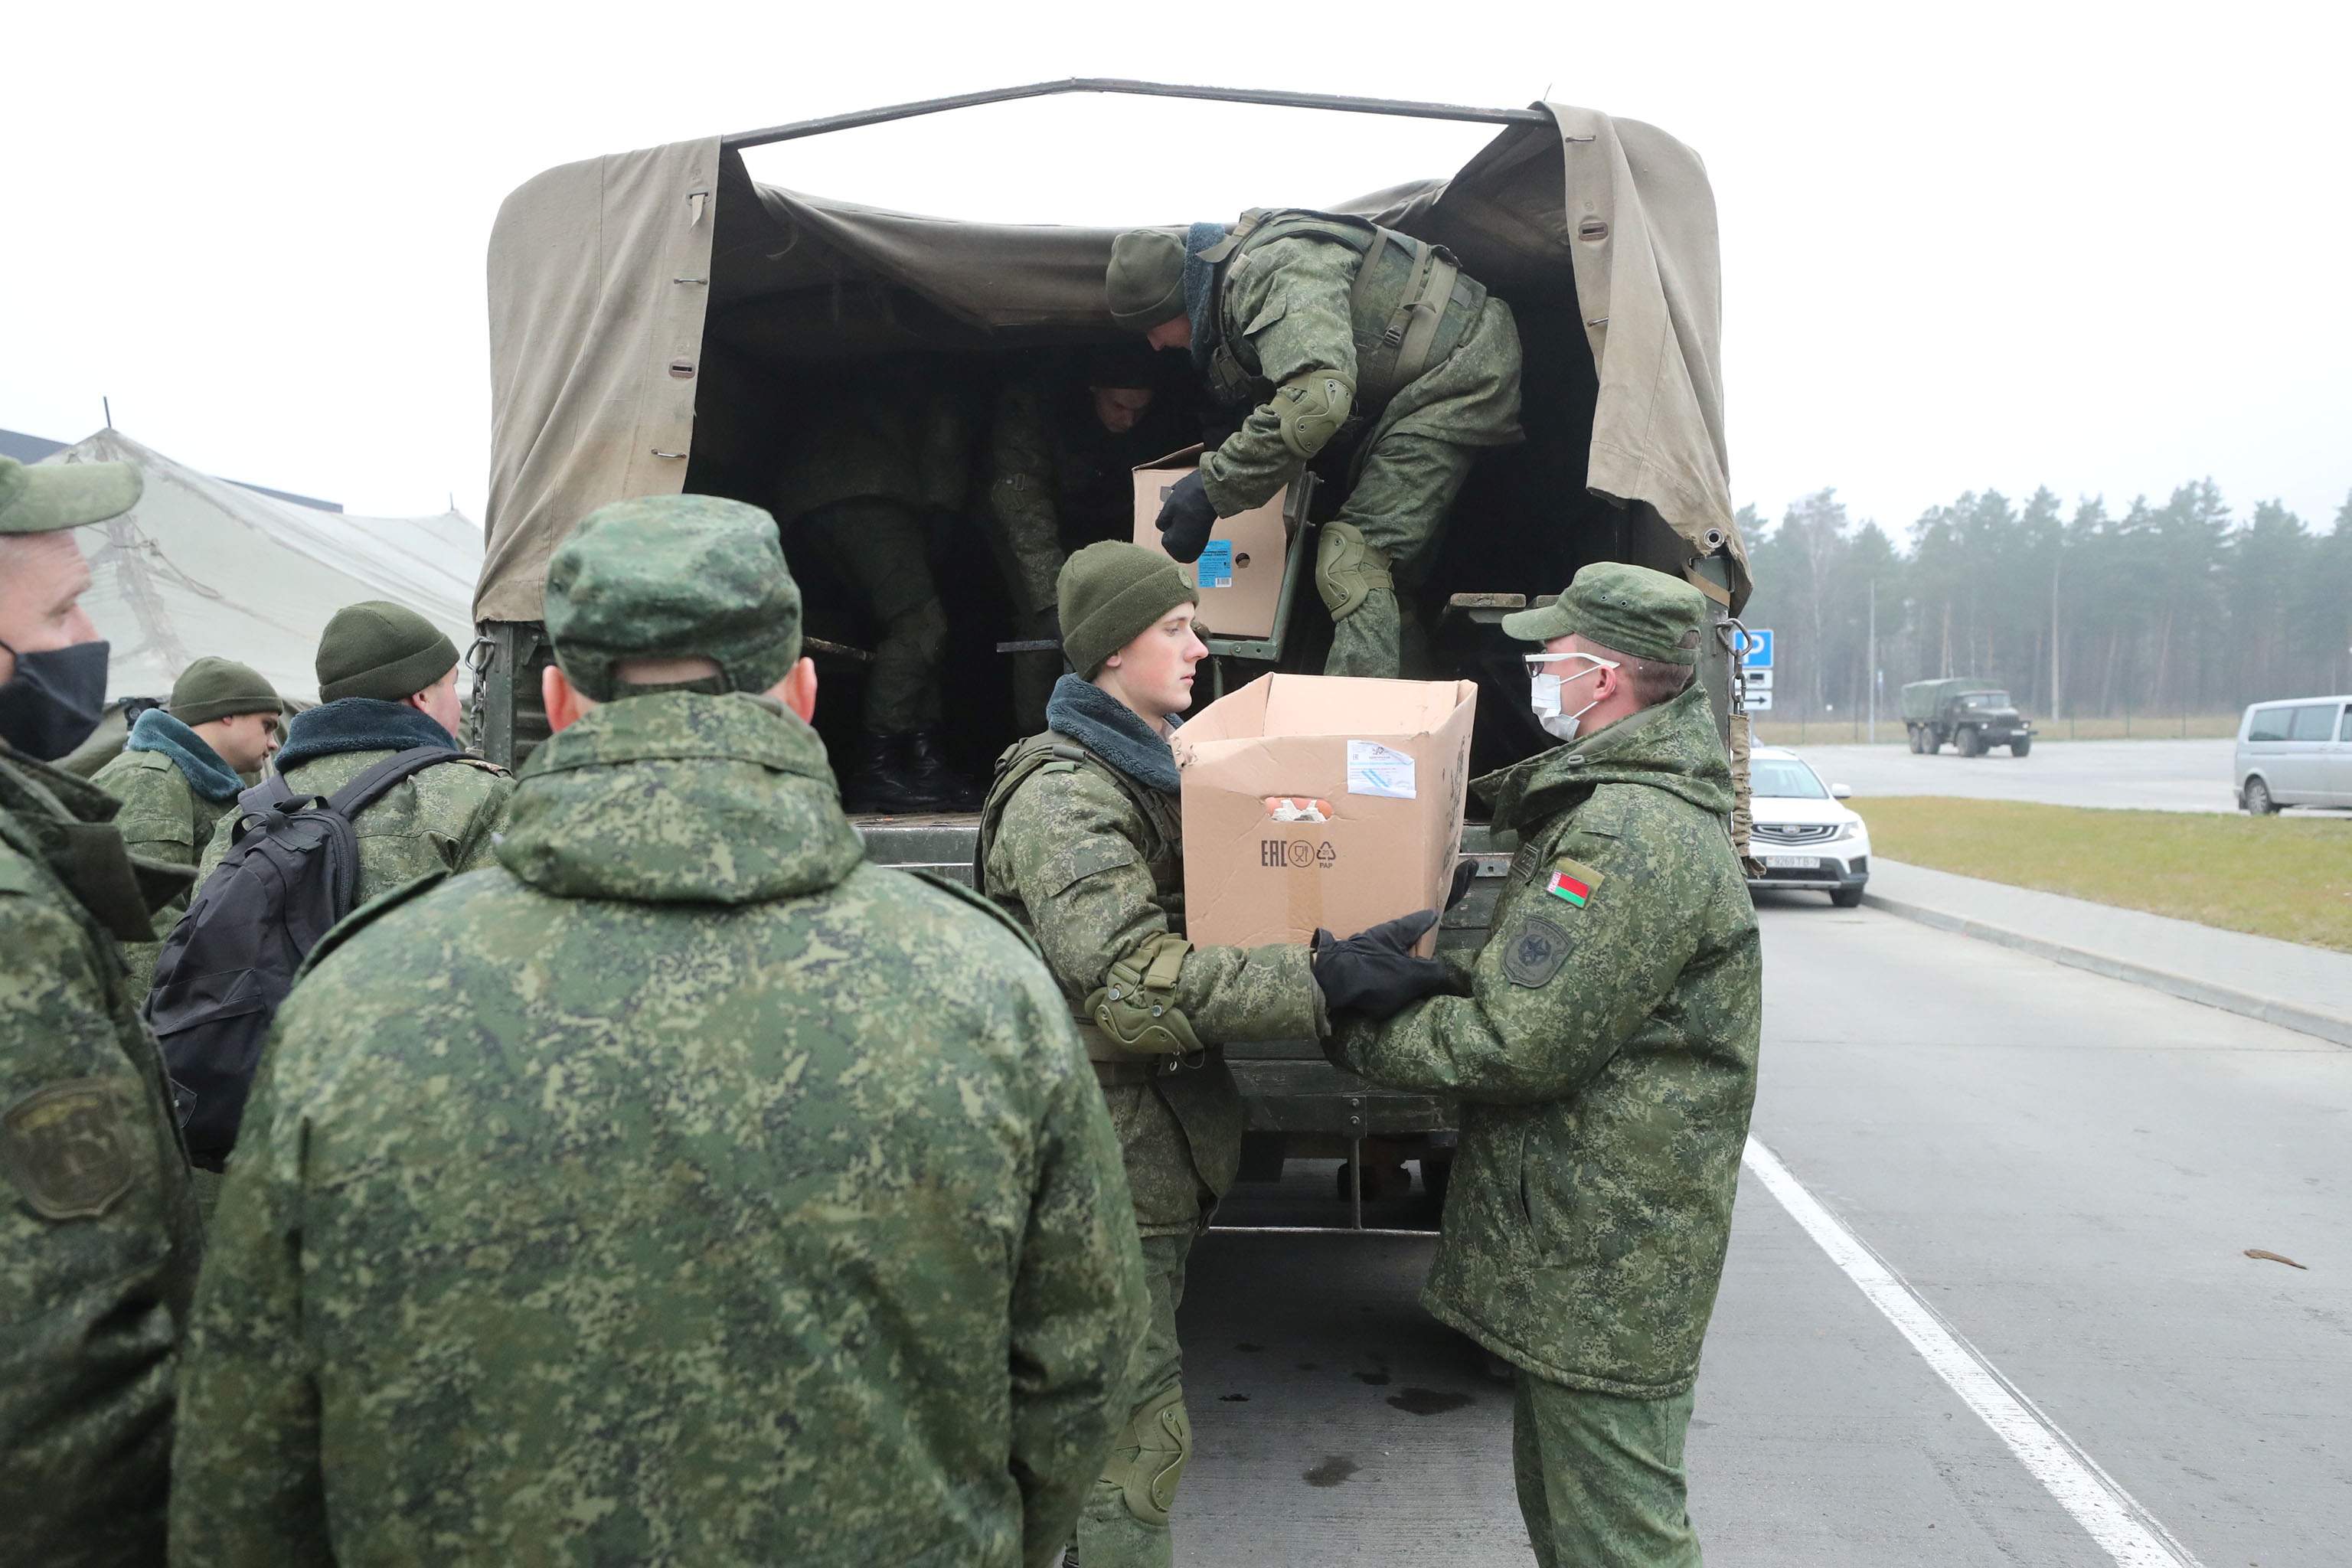 Belarusian service members unload a truck with humanitarian aid during its distribution near Bruzgi - Kuznica checkpoint on the Belarusian-Polish border in the Grodno region, Belarus November 17, 2021. Leonid Scheglov/BelTA/Handout via REUTERS  